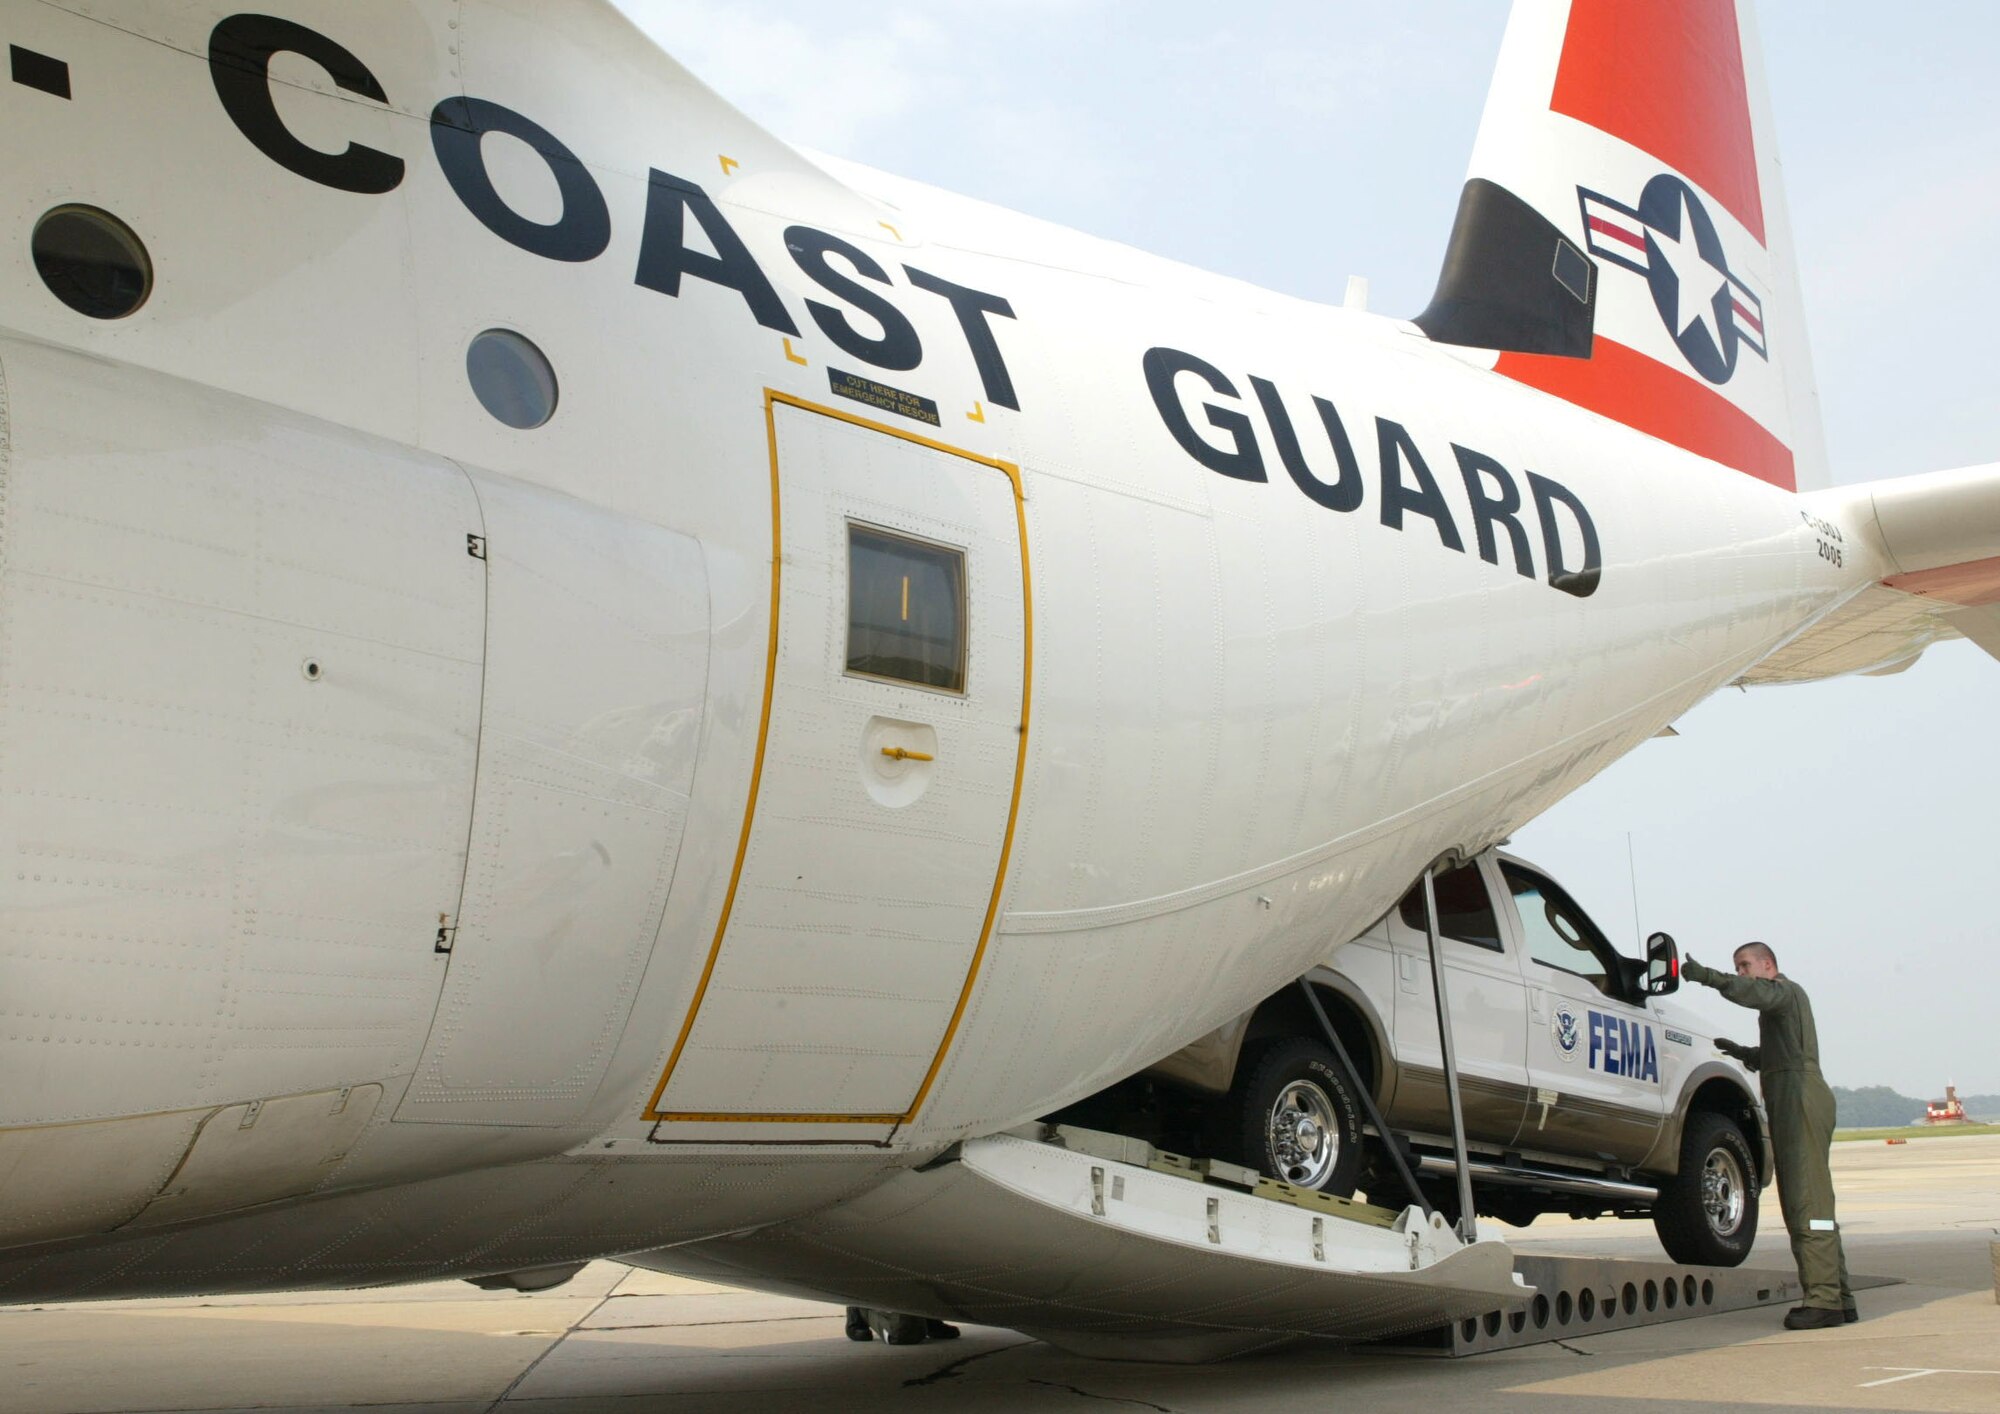 The transient aircraft ramp at Dobbins Air Reserve Base was home to a first-time partnership between the Coast Guard and a FIRST team. A Coast Guard C-130 crewmember loads a vehicle belonging to one of the Federal Emergency Management Agency's Federal Incident Response Support Team. The FIRST team is headed to Puerto Rico ahead of Atlantic storms. The teams are meant to support state and local response by expediting federal assistance and communication. The transport came from USGC Air Station at Elizabeth City, N.C. (U.S. Air Force photo/Don Peek)